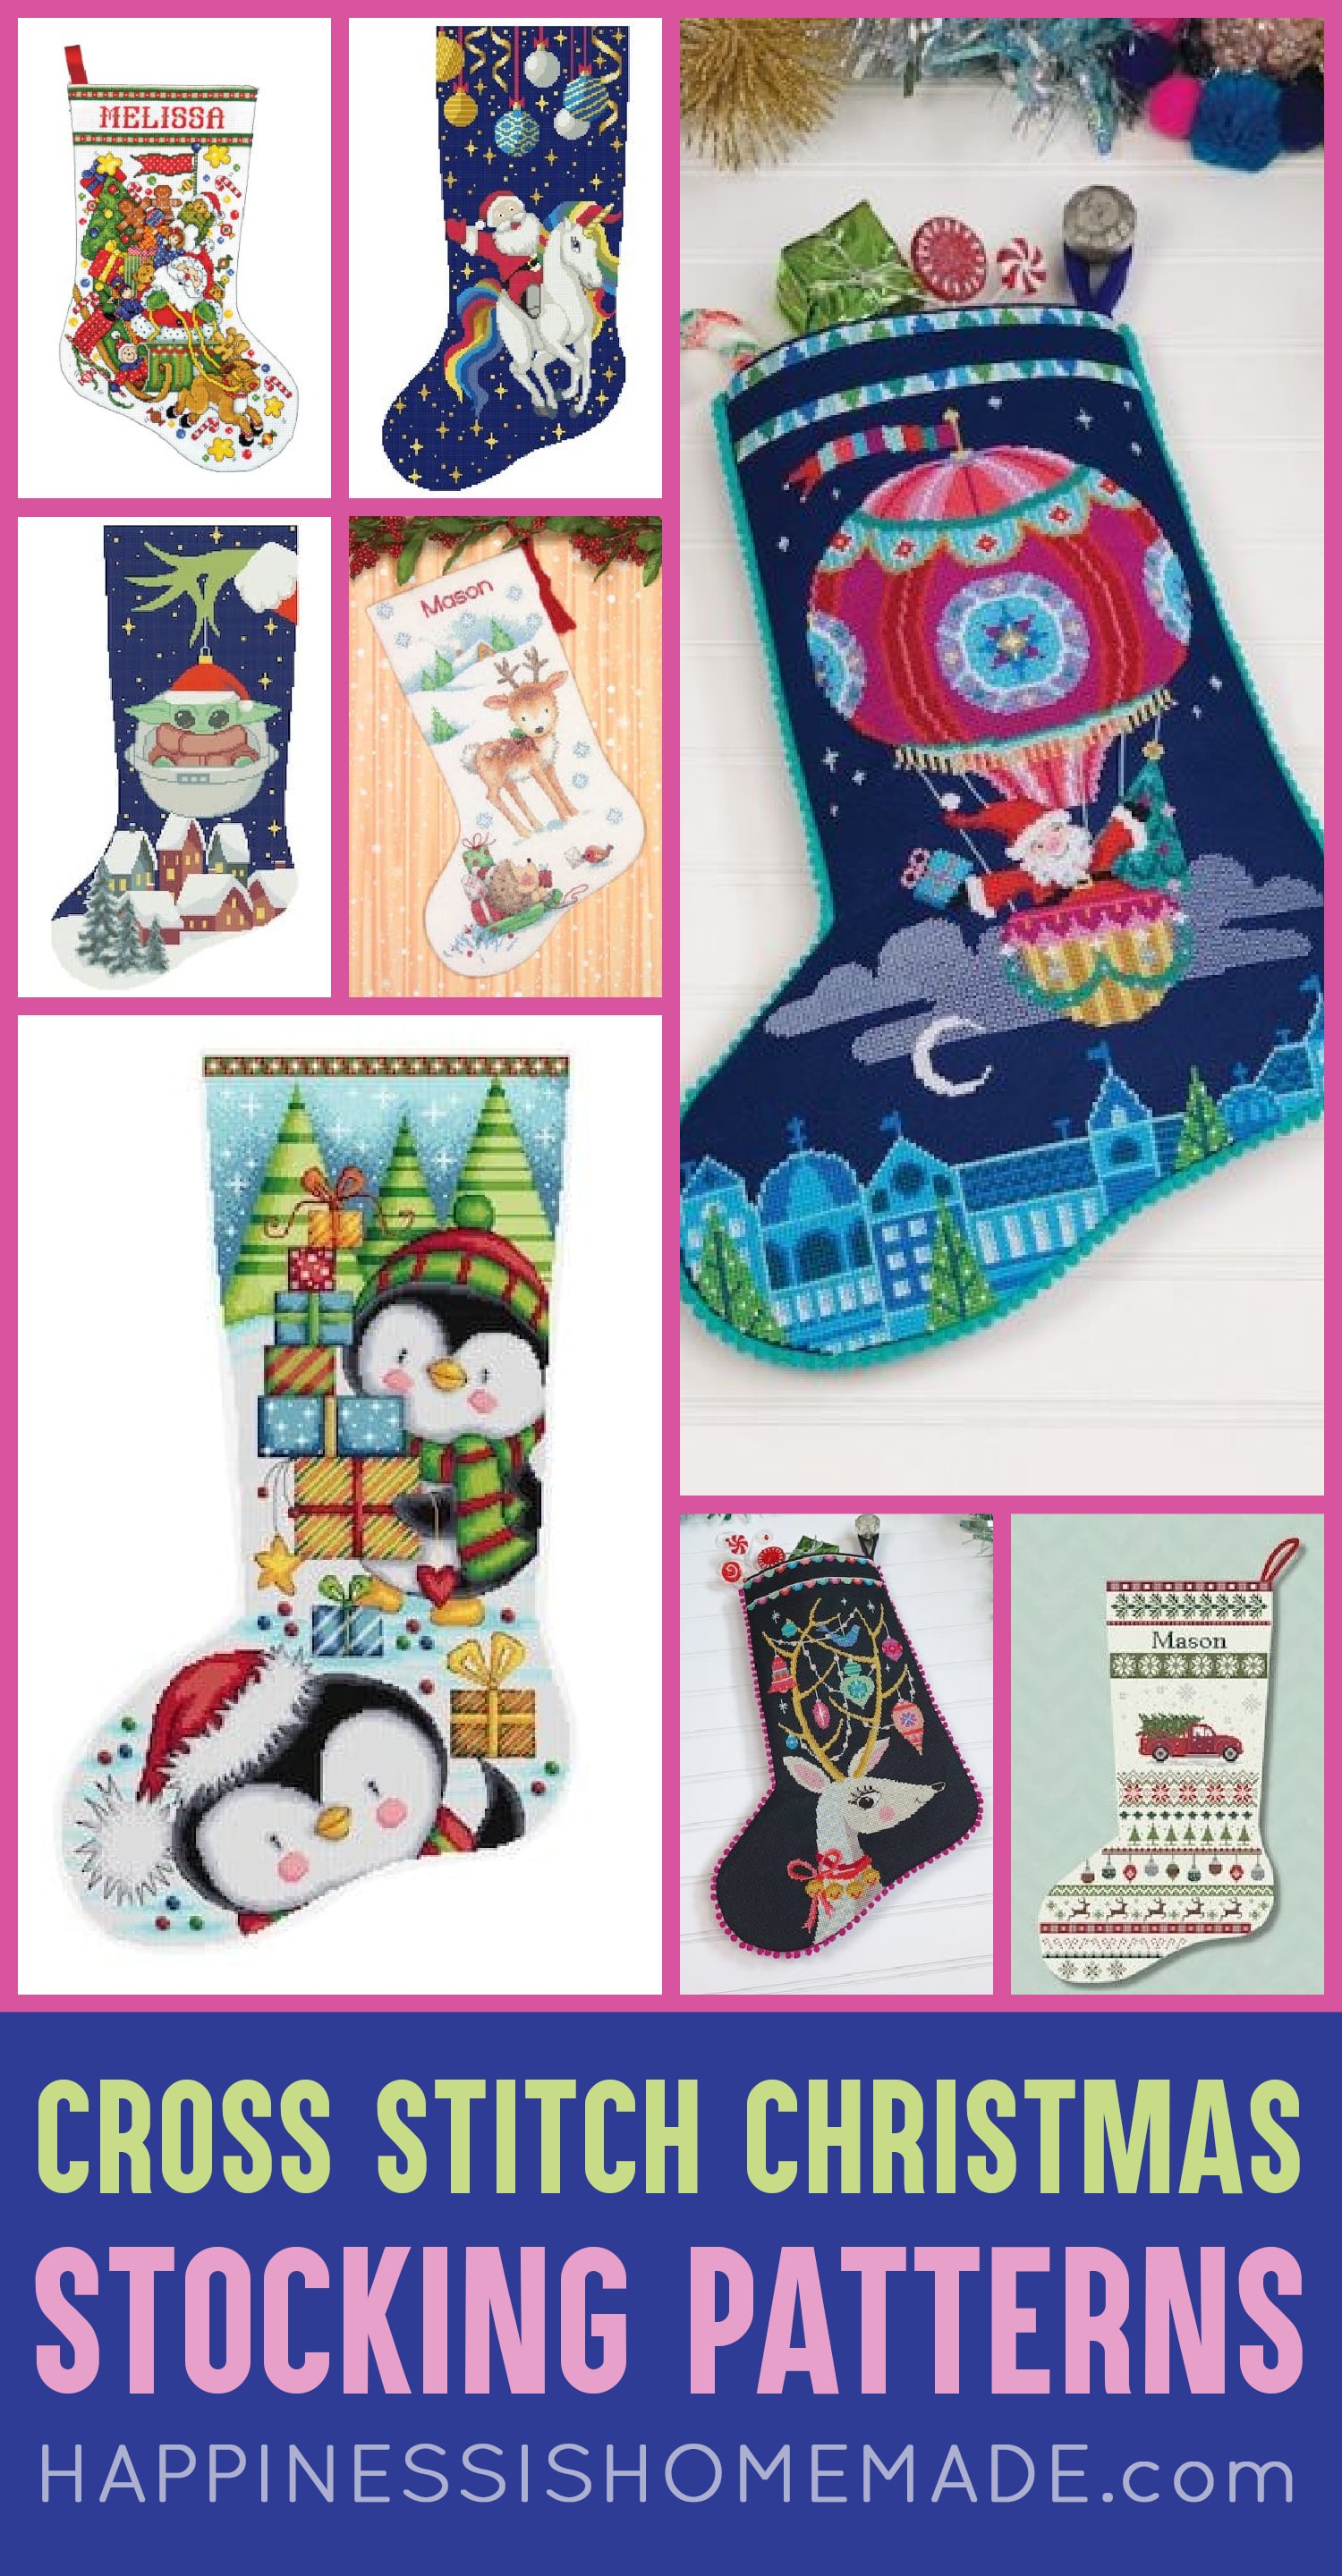 15 Cross Stitch Christmas Stocking Patterns - Happiness is Homemade